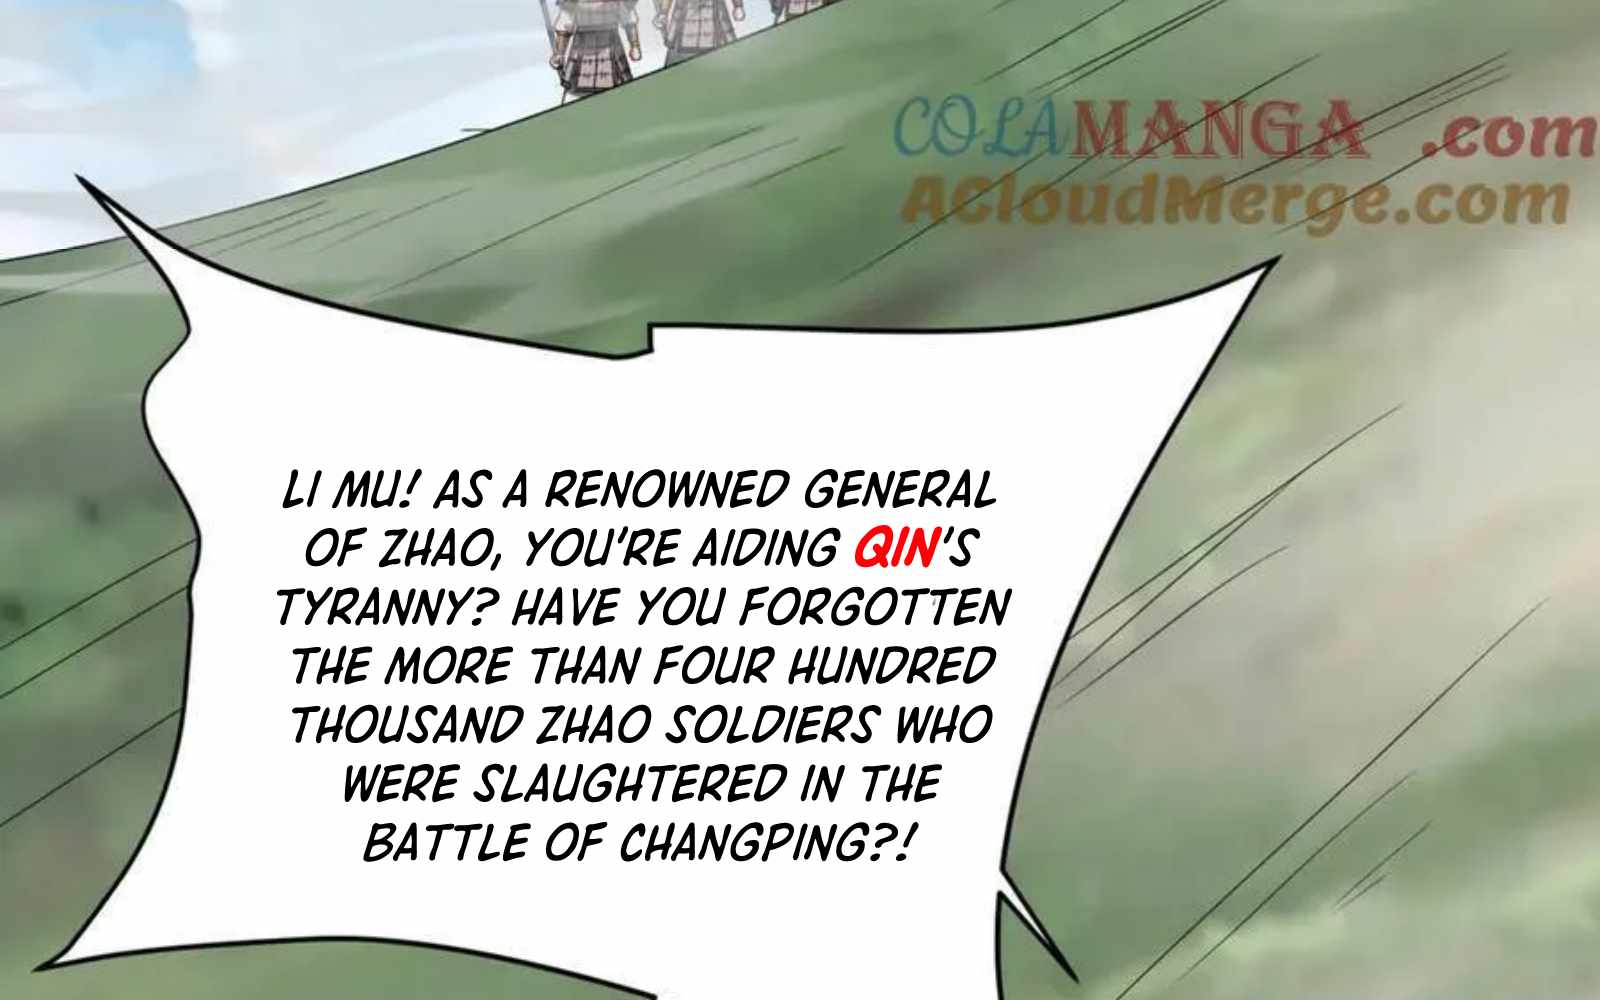 read The Son Of The First Emperor Kills Enemies And Becomes A God Chapter 147-2 Manga Online Free at Mangabuddy, MangaNato,Manhwatop | MangaSo.com